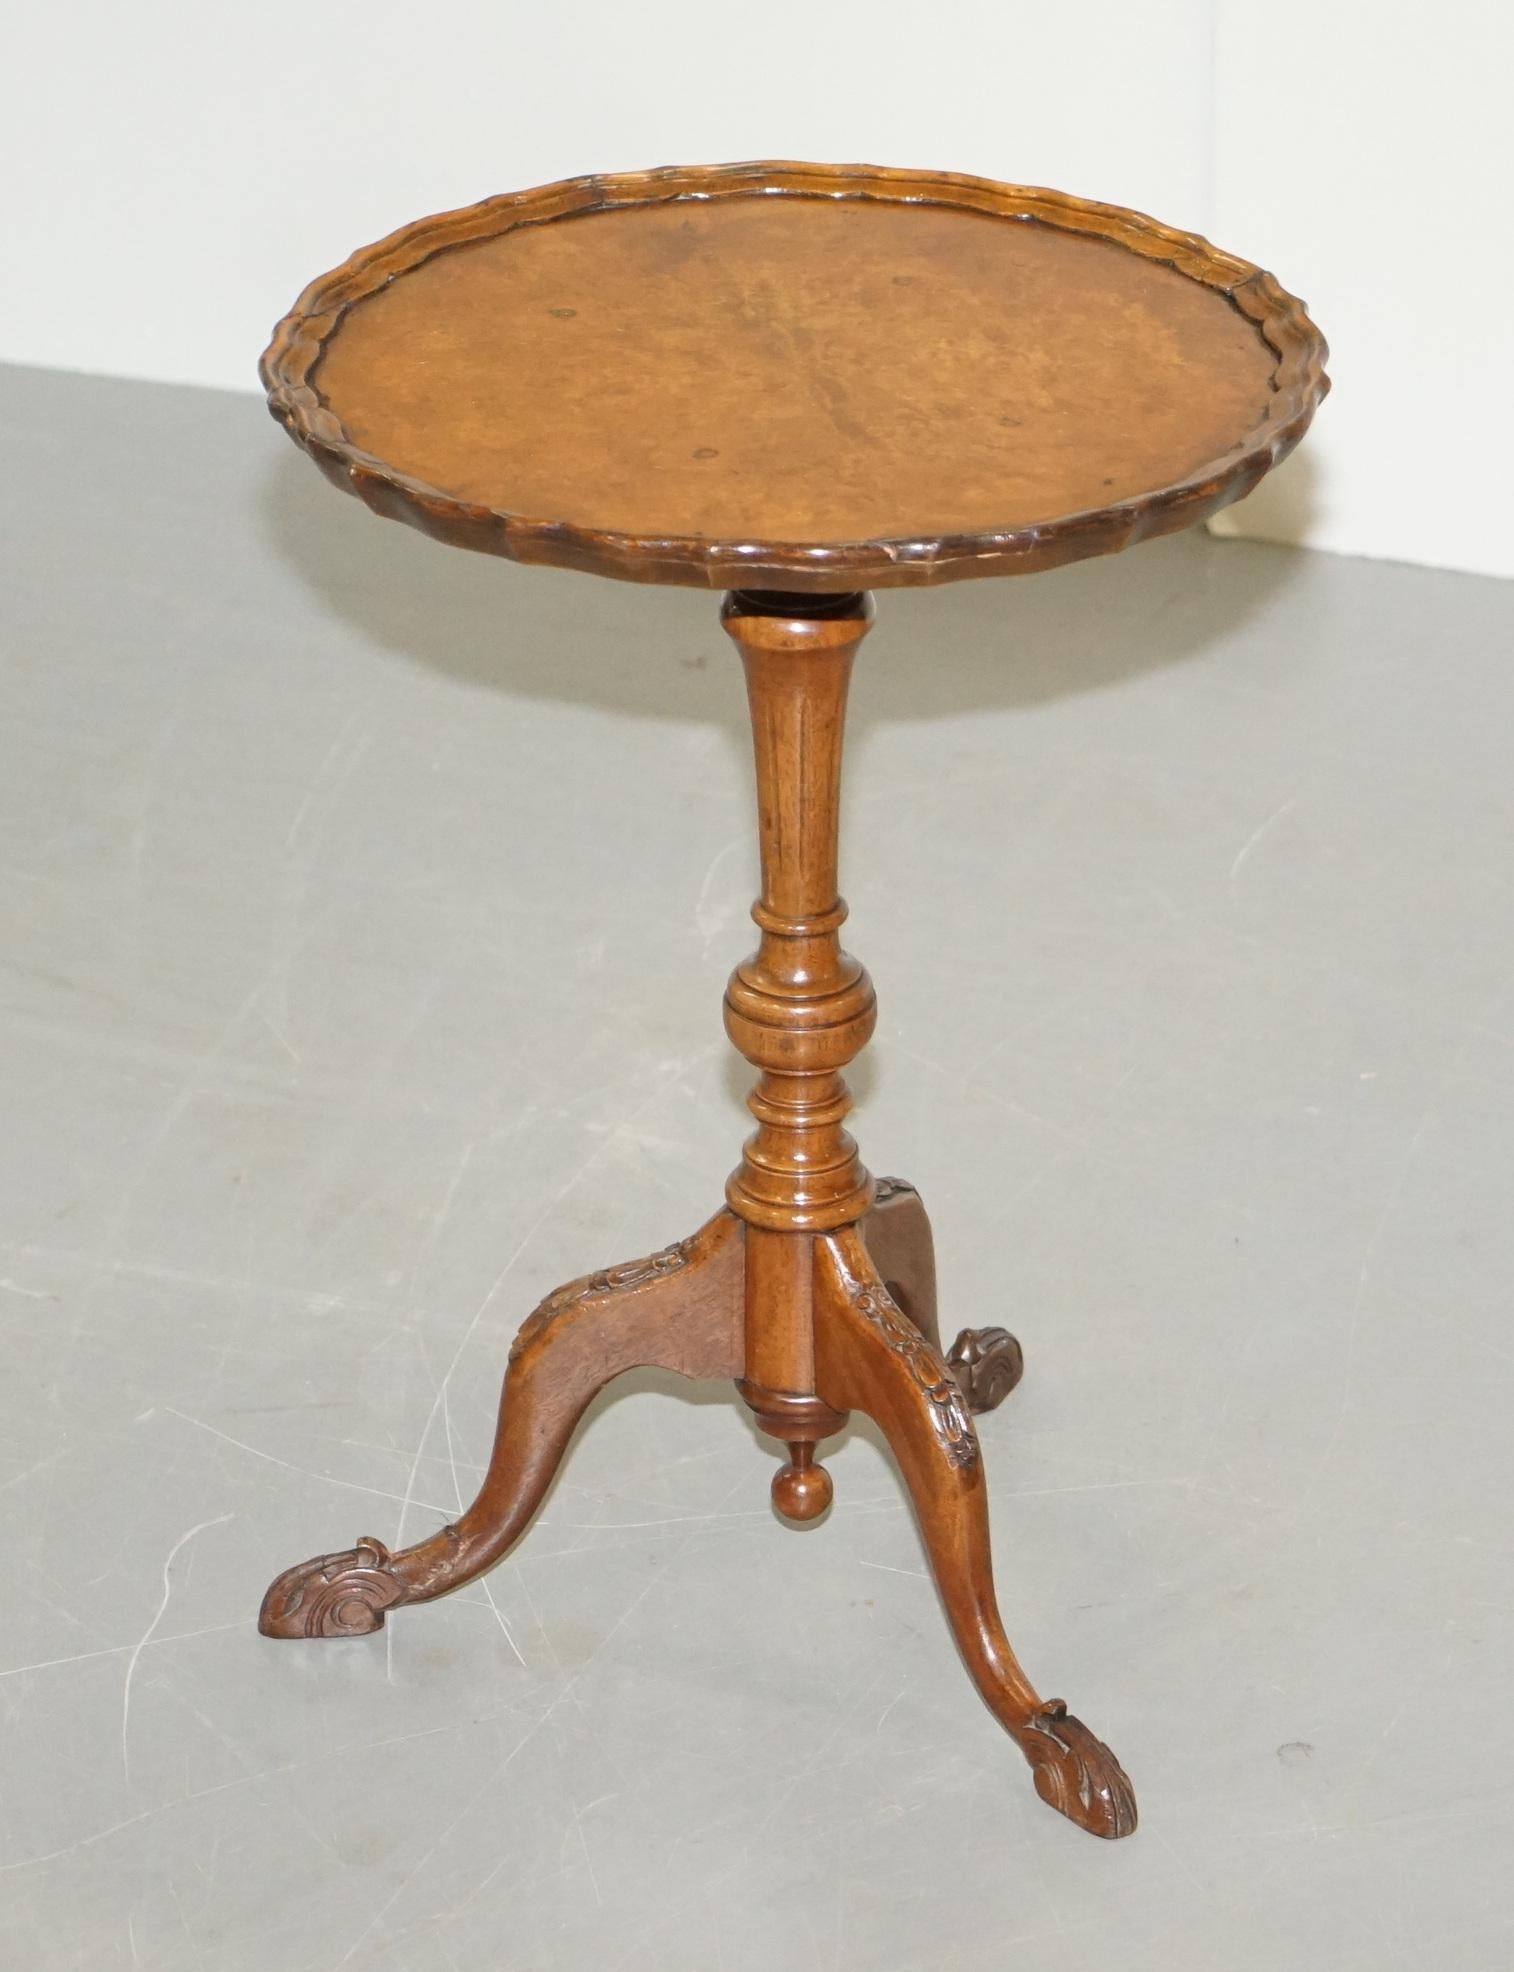 We are delighted to offer for sale this sublime Victorian circa 1880 burr walnut tripod table

A glorious little side table, heavily carved to the base and with a timber patina to die for on the top

There will be normal age related patina marks